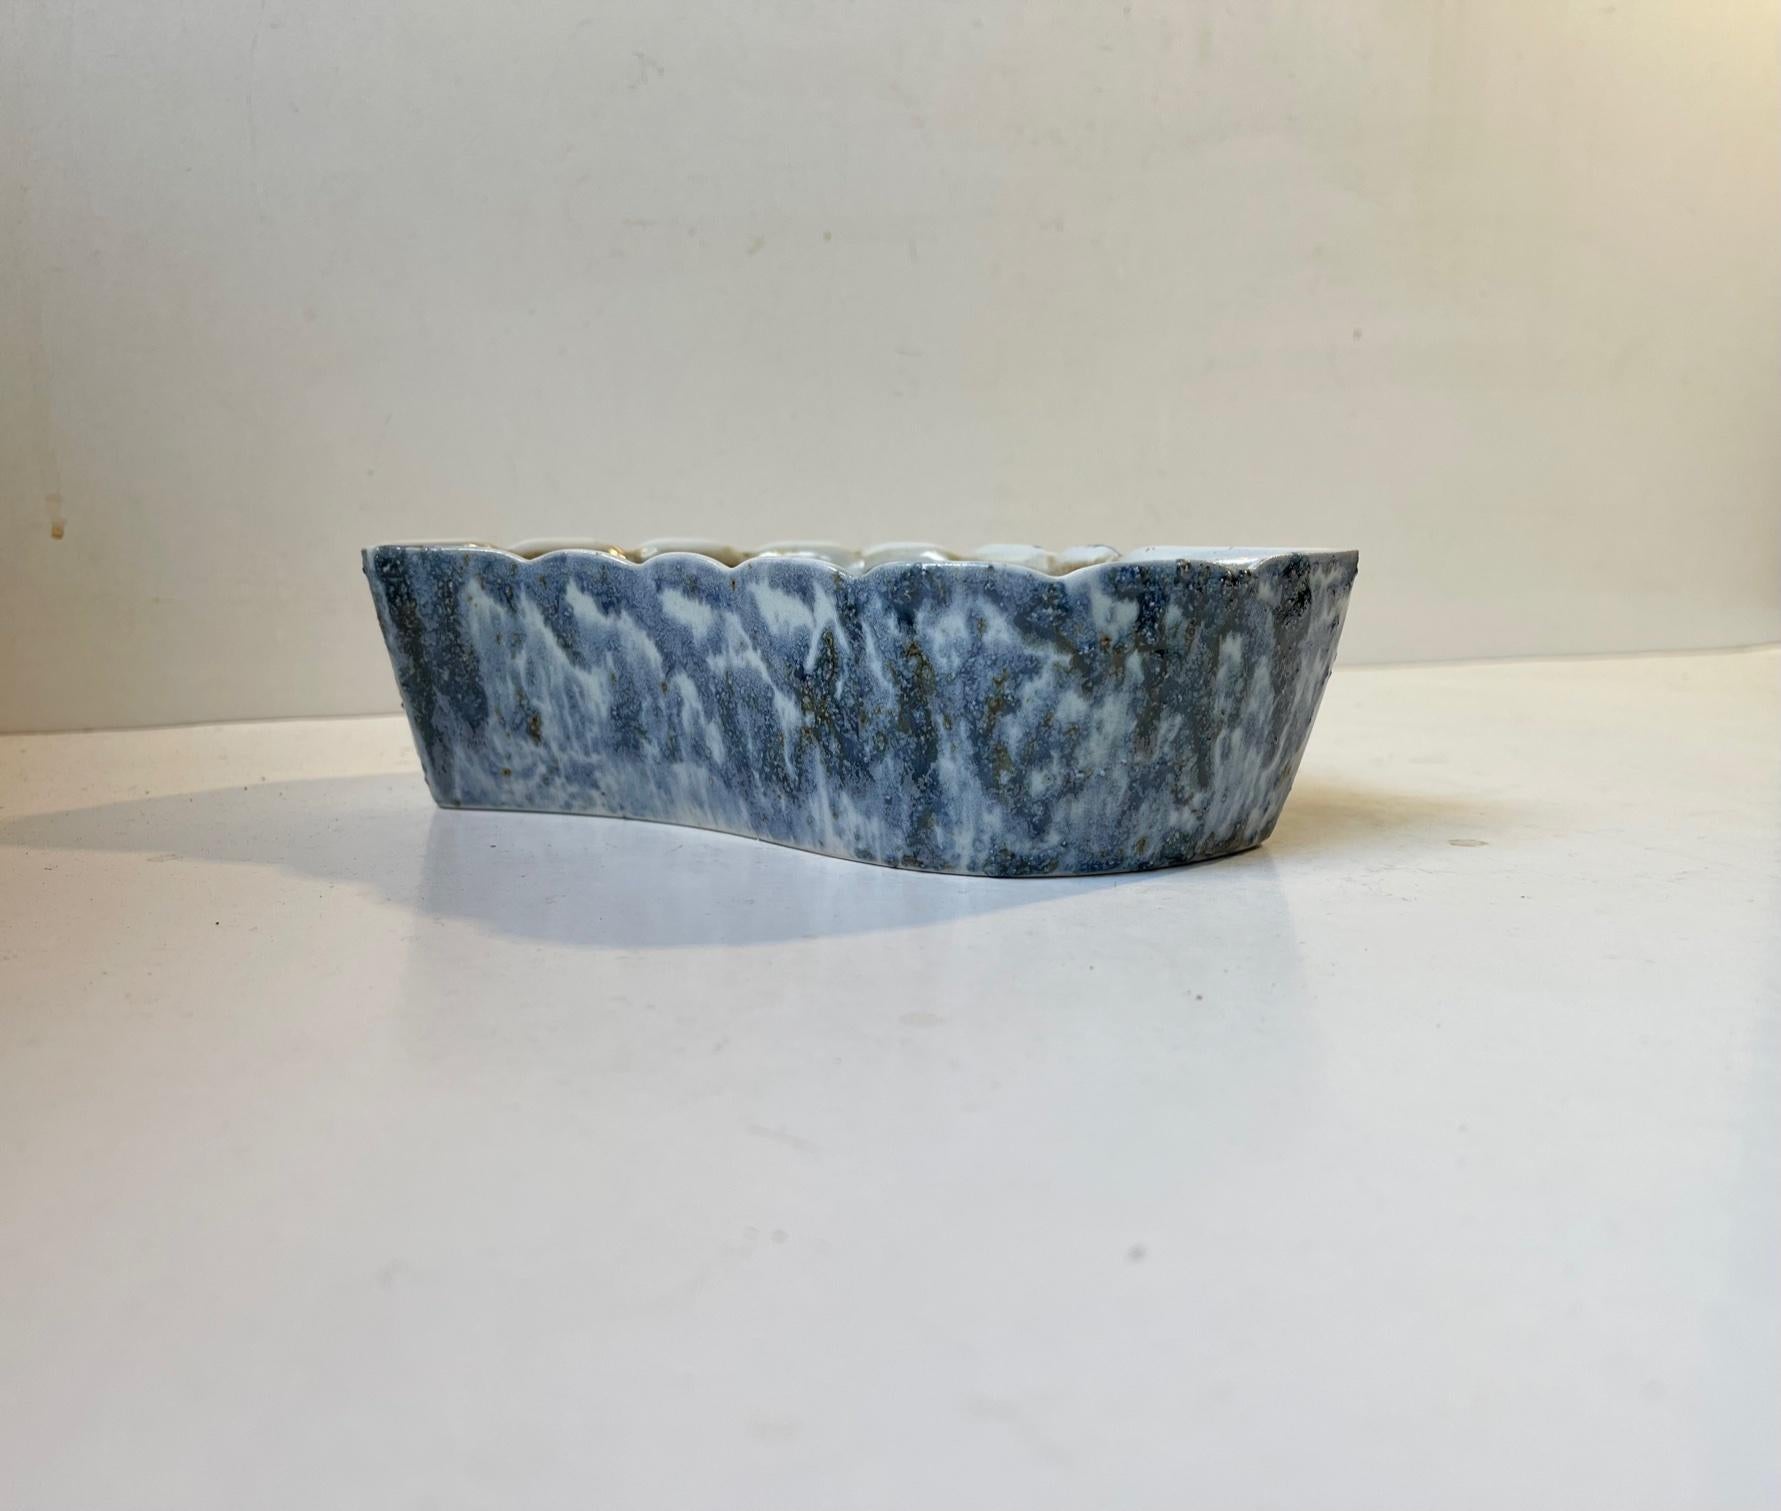 Mid century glazed ceramic ikebana bowl or vase.. Textured glazes - colors are brown, blue, grey and white. Manufactured in Japan circa 1970 by Yamasan. No chips, cracks or repairs. Measures: Height: 5.5cm. Width: 19.5cm. Depth: 9.5cm.